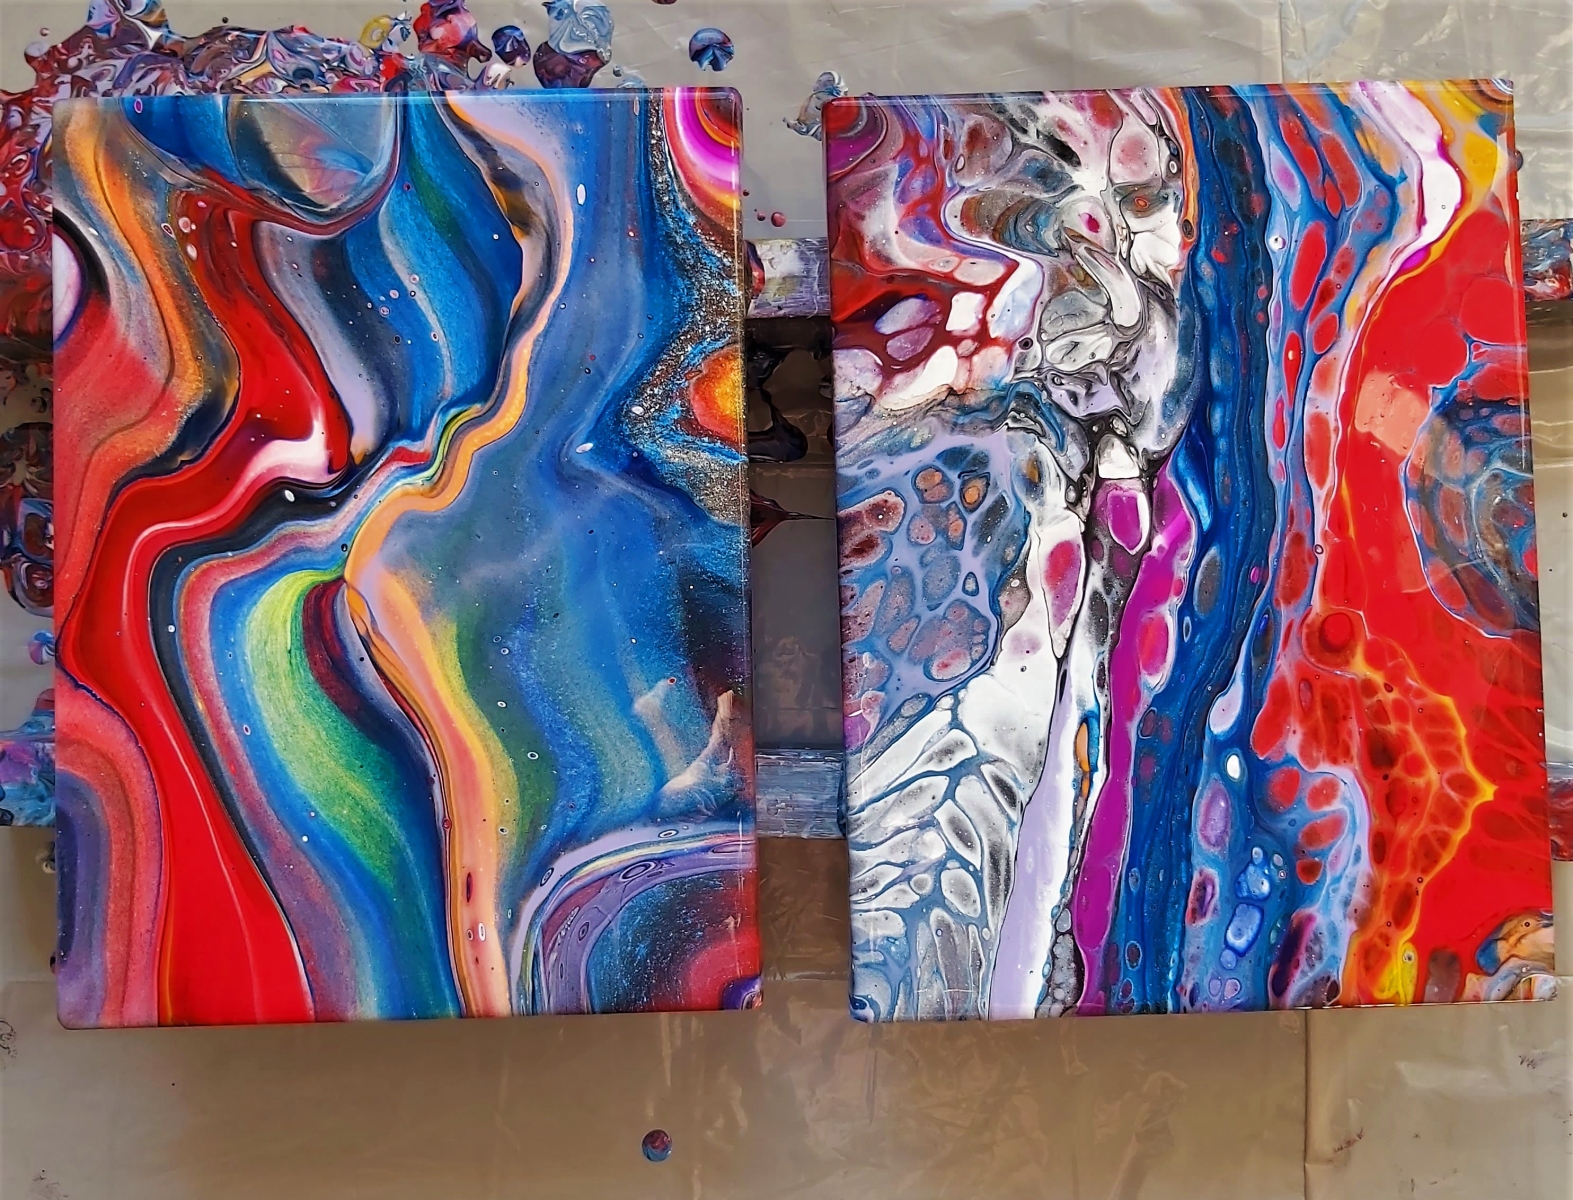 Acrylic Pour Painting with Schmincke Pouring Medium and Inks - Jackson's  Art Blog